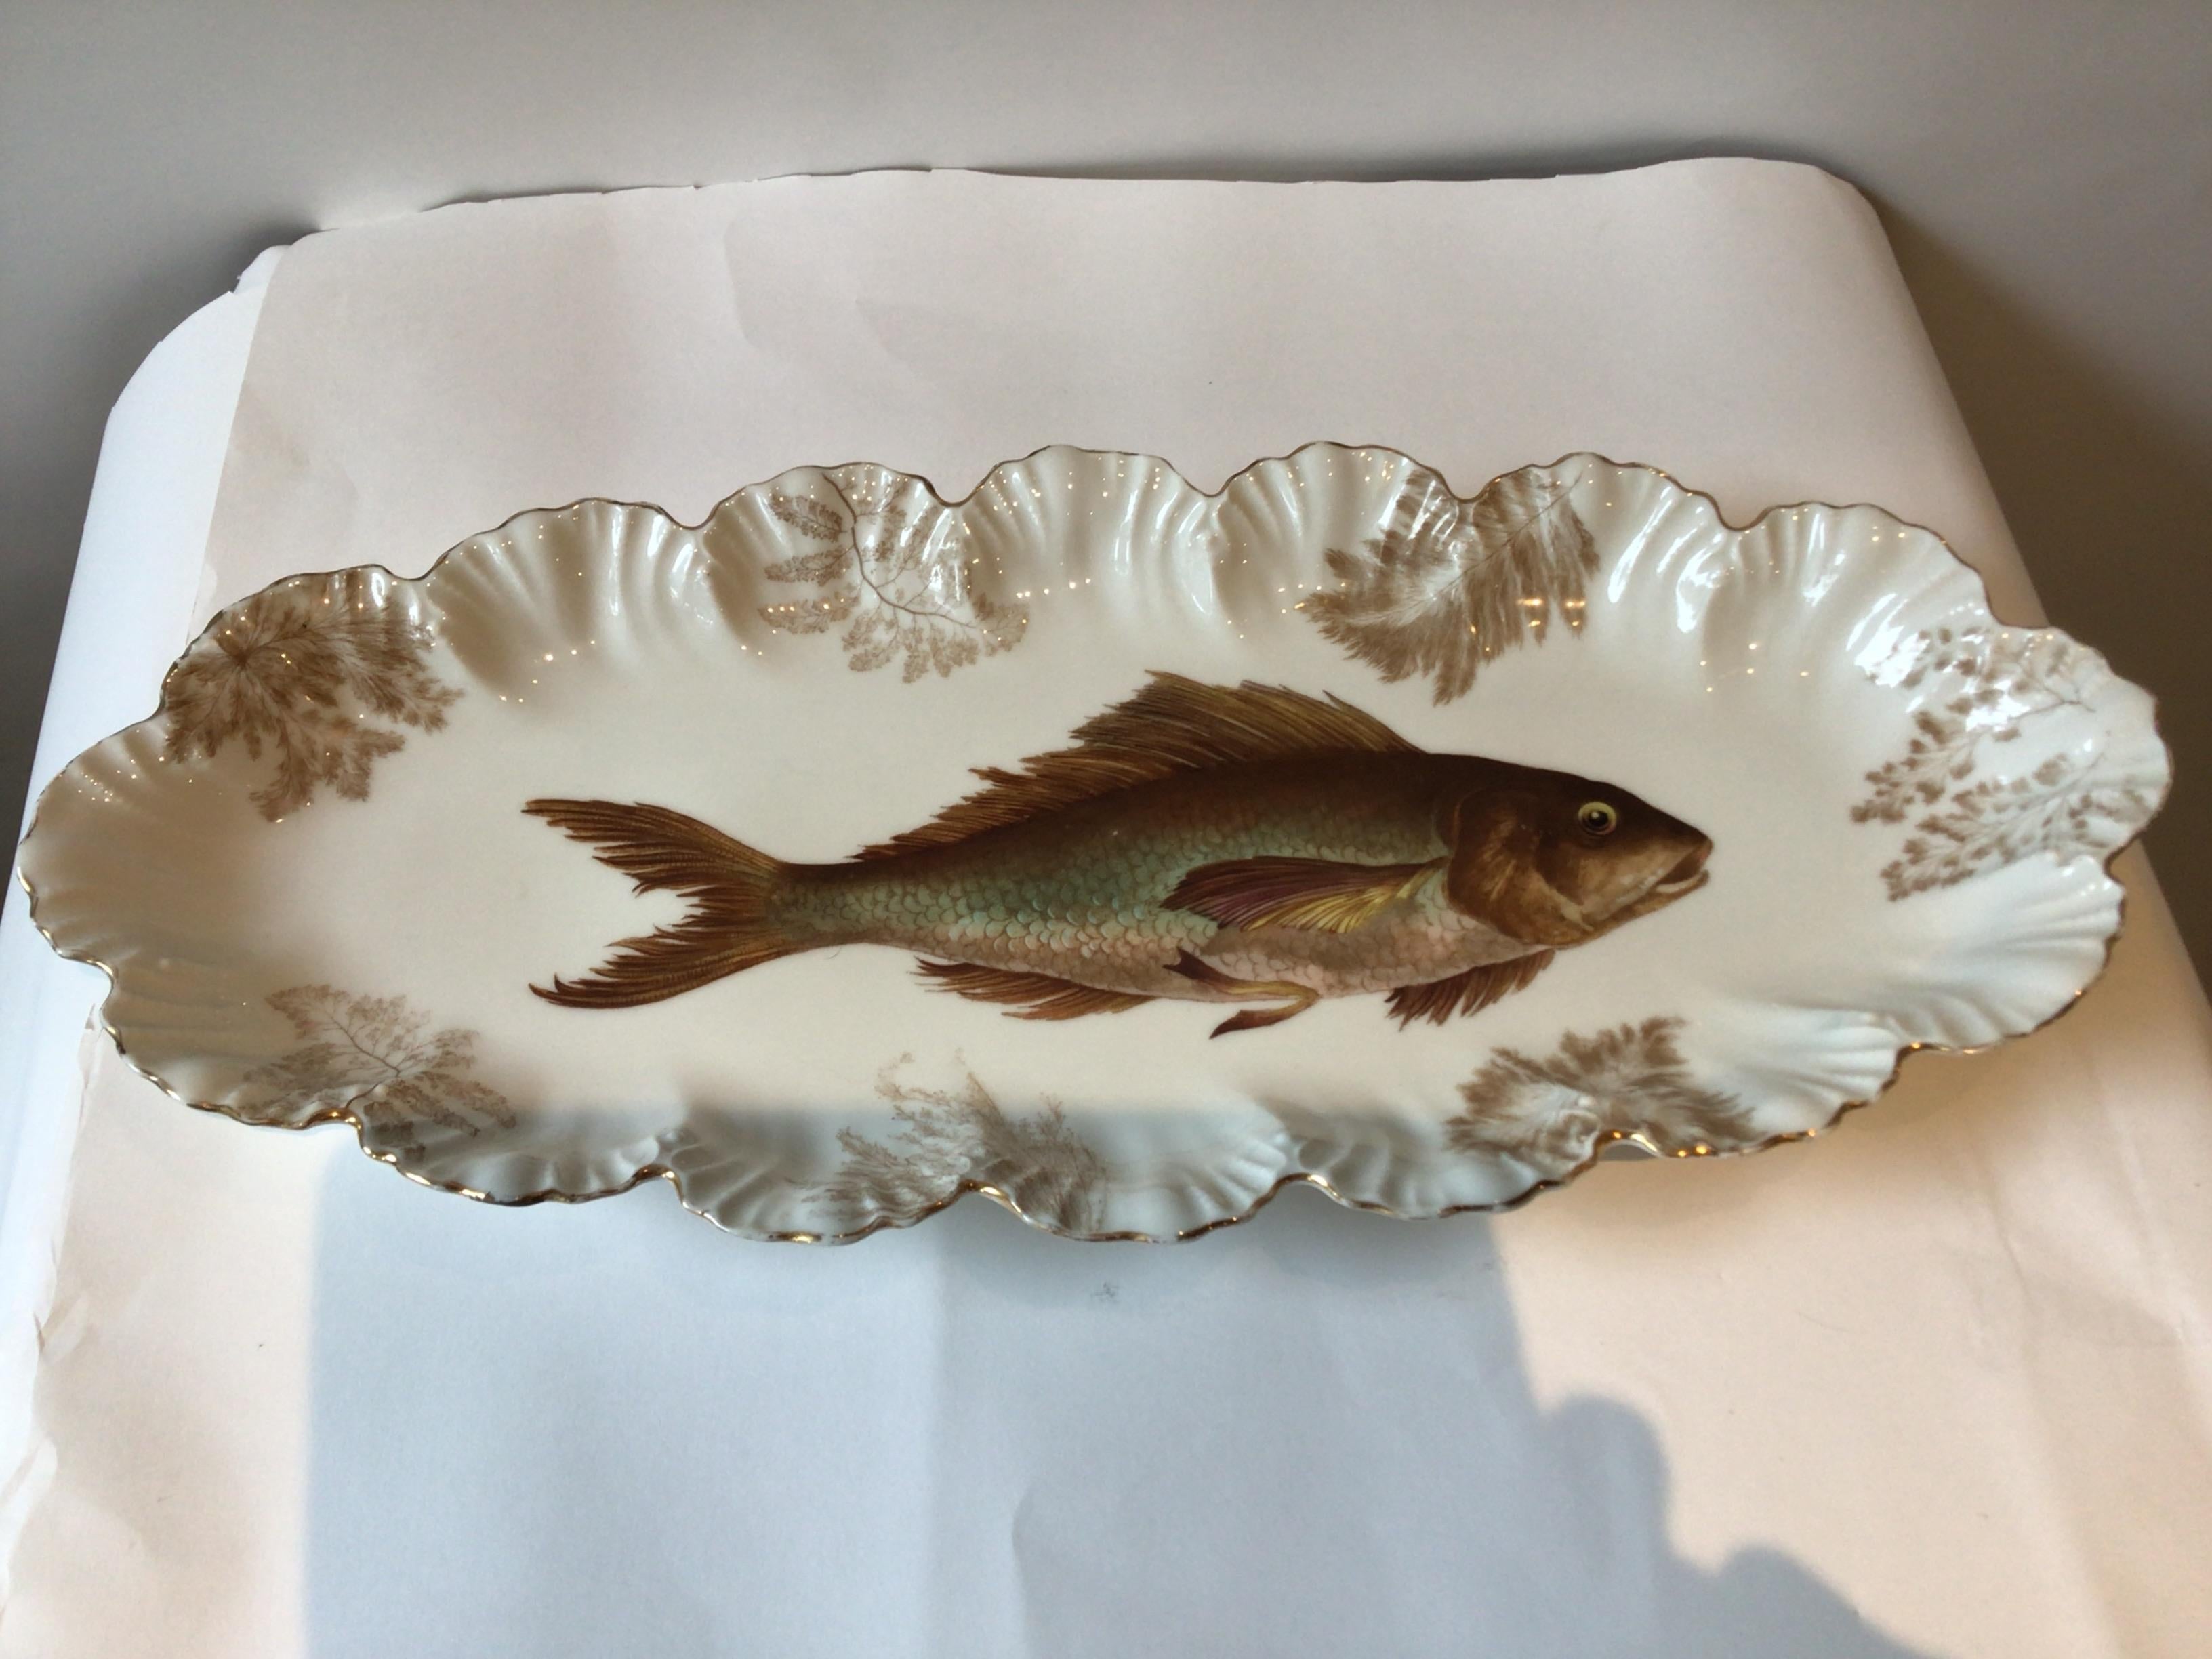 1860s 13 piece Davis Collamore Fish set. Platter and 12 plates, marked A.L. Depose. Transfer ware with painted highlights.